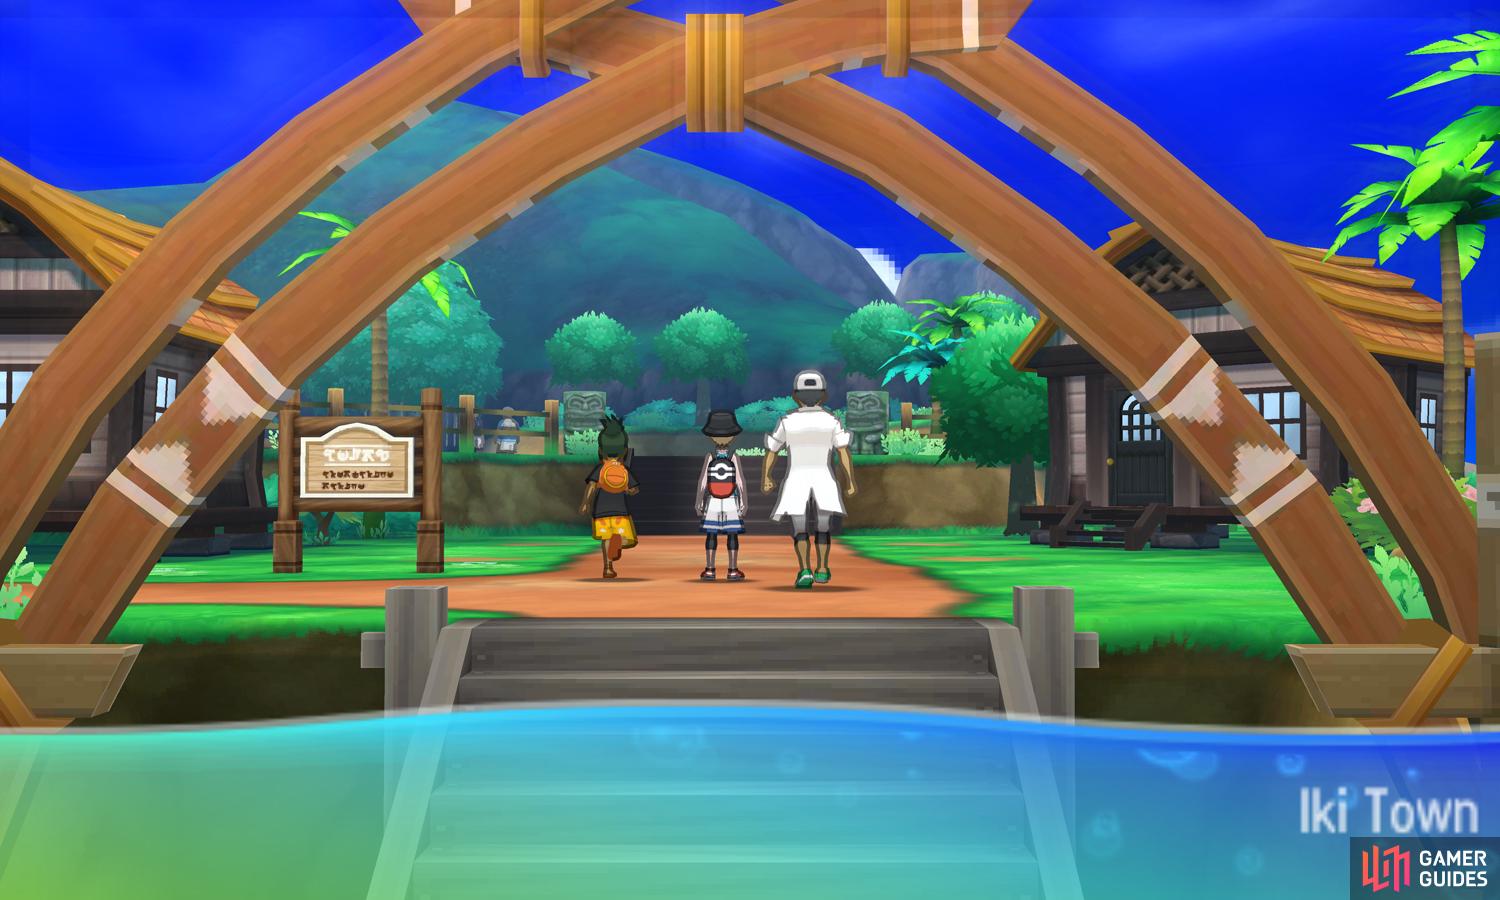 This village is so small it doesn't even have a Pokémon Center.